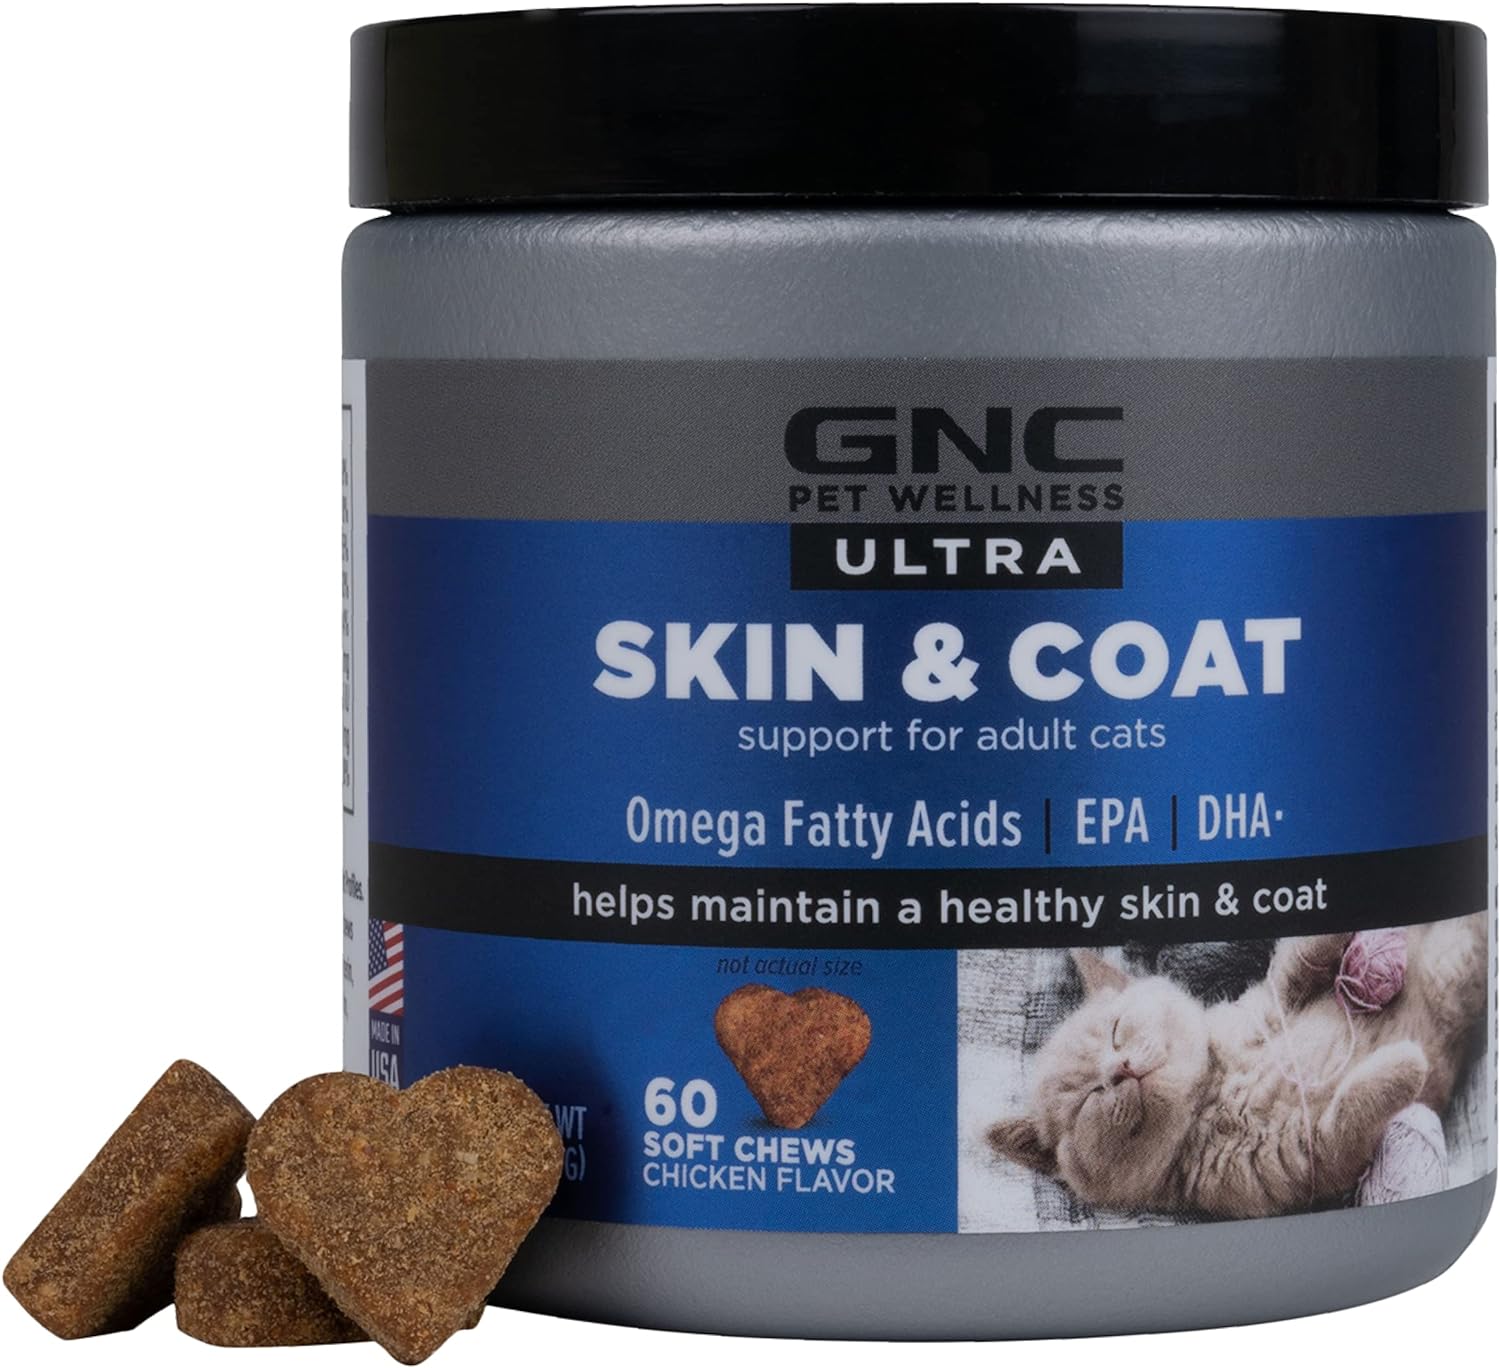 GNC Pets Ultra Skin & Coat Soft Chews, Cats, Chicken Flavor. 60-ct in an 8-oz Canister | Skin an